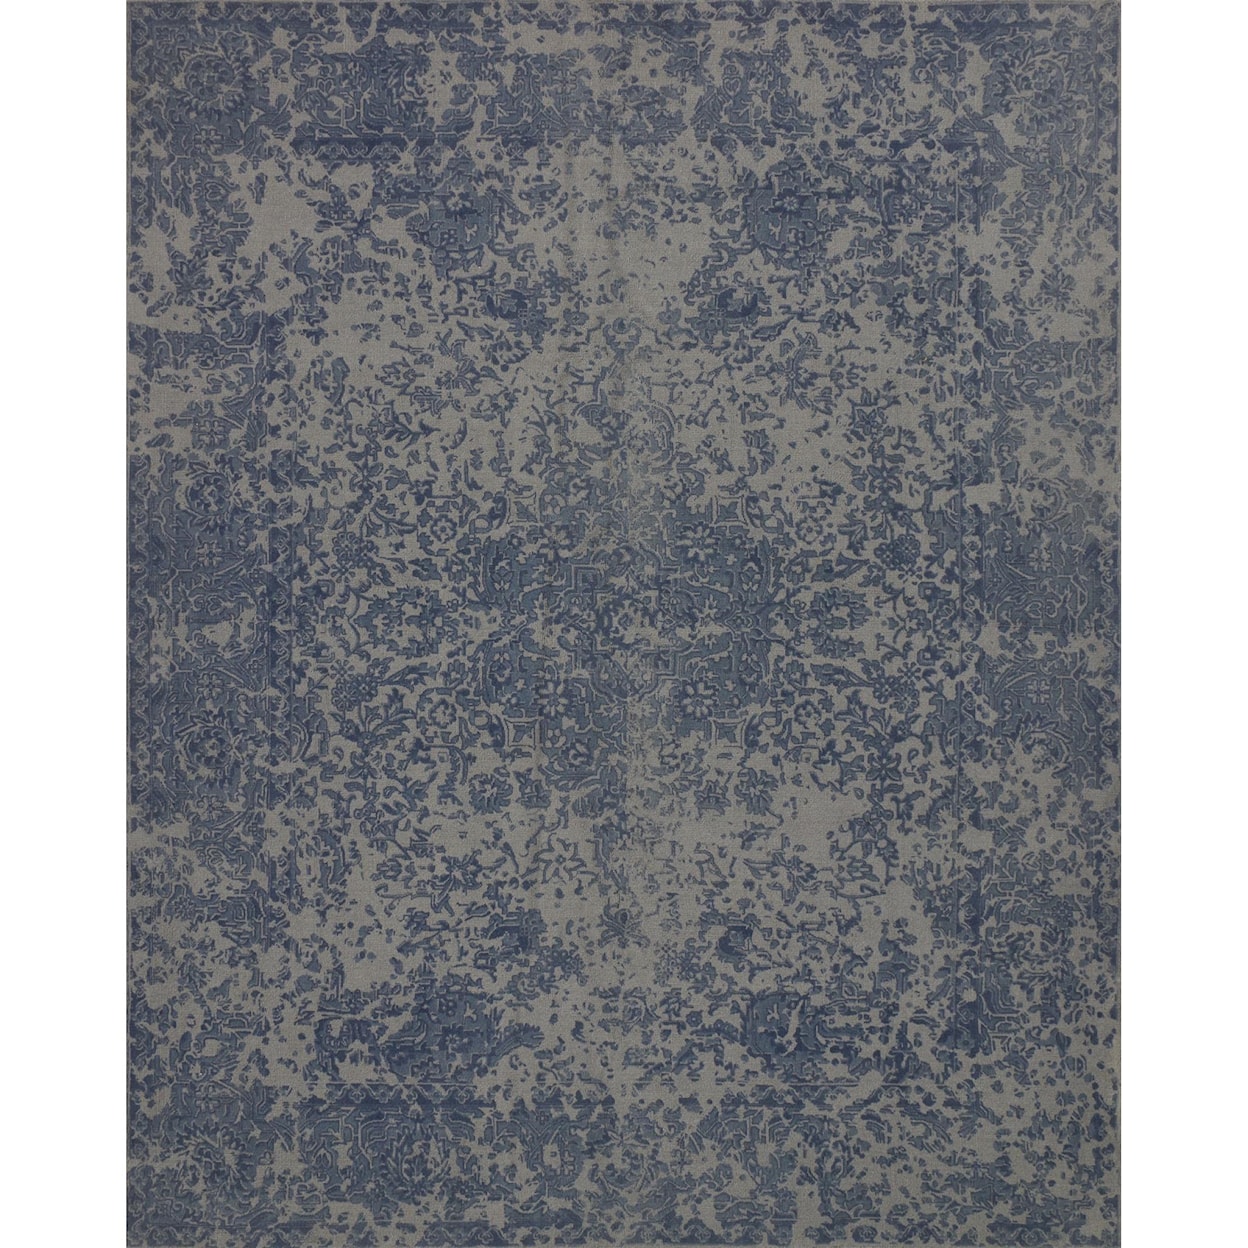 Magnolia Home by Joanna Gaines for Loloi Lily Park 5' 0" x 7' 6" Rectangle Rug